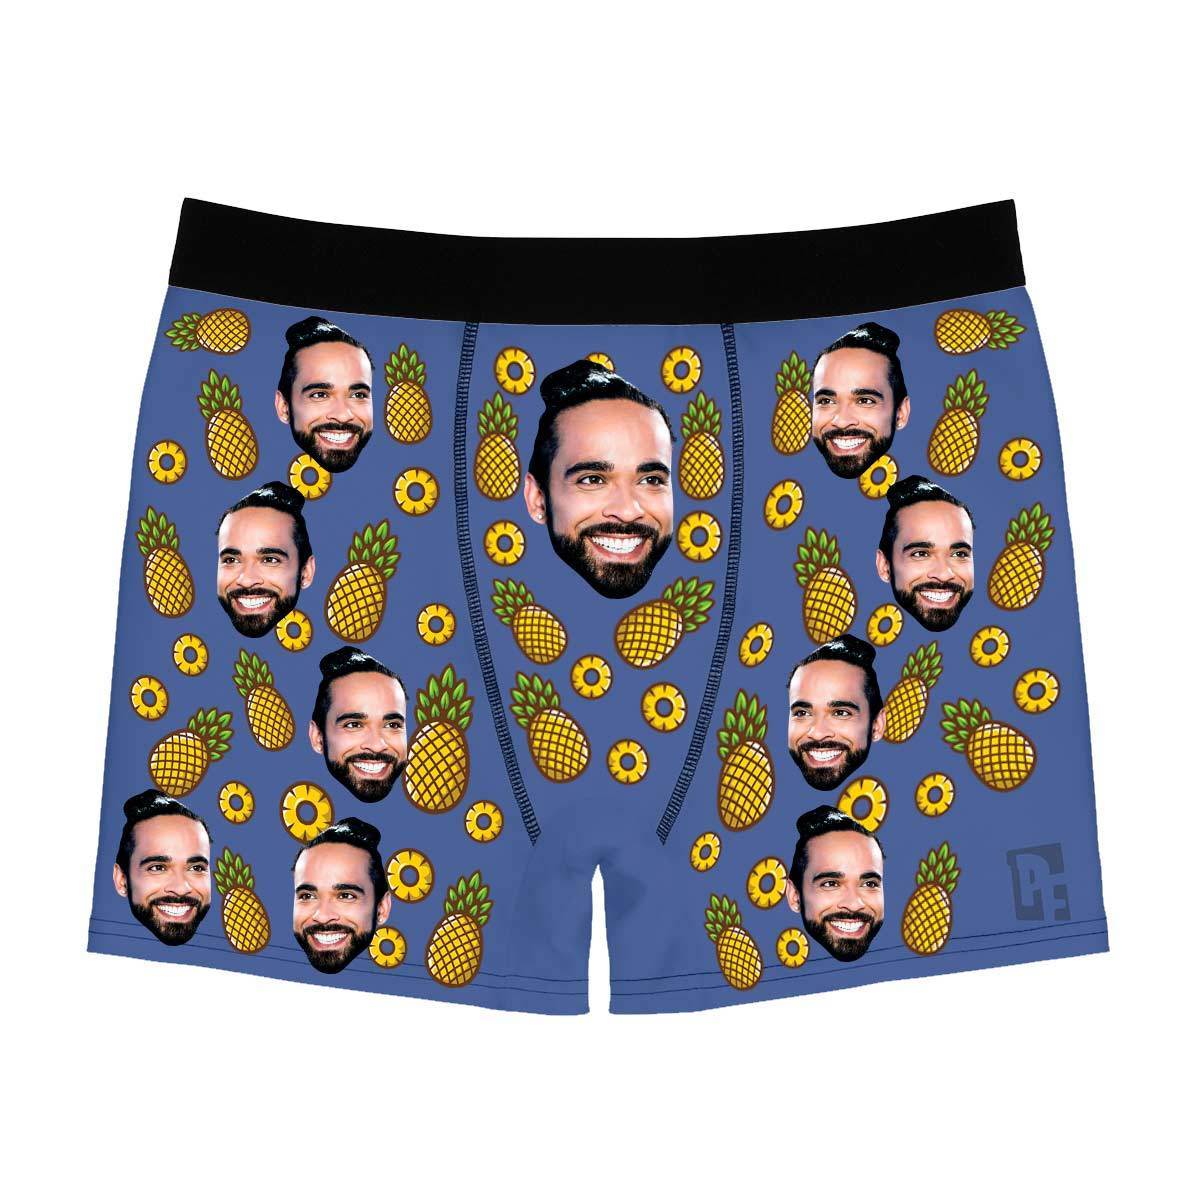 Darkblue Fruits men's boxer briefs personalized with photo printed on them